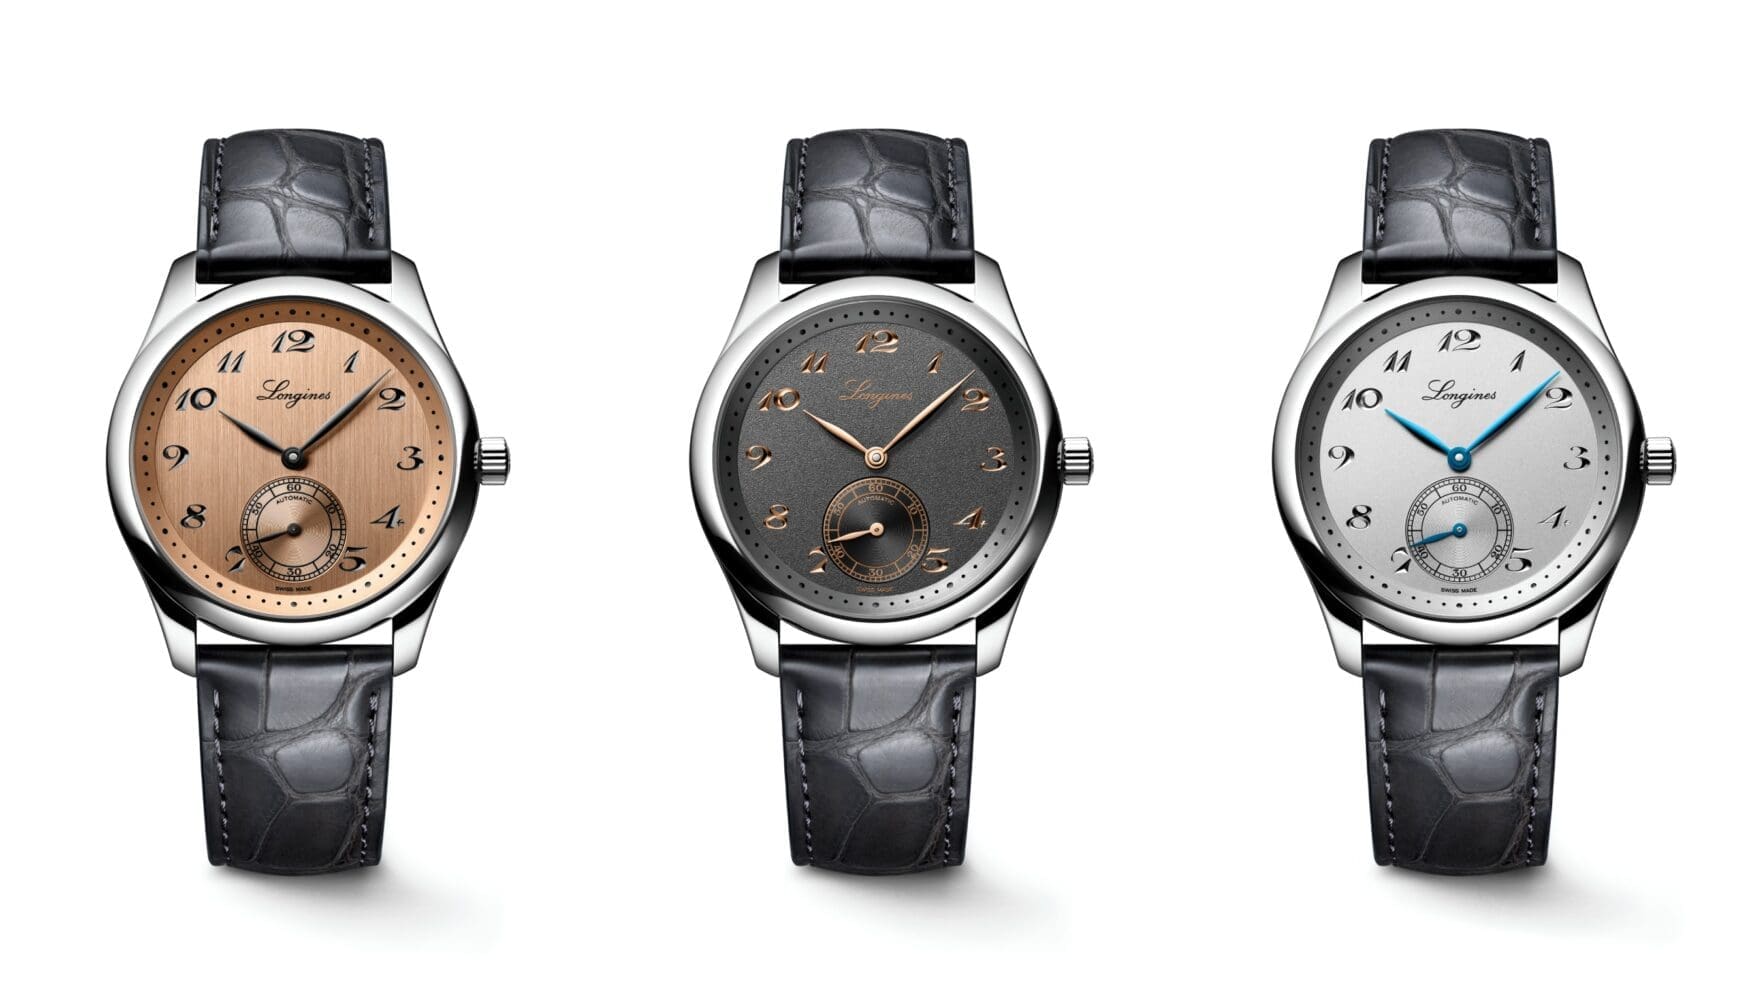 The Longines Master Collection Small Seconds is what happens when a brand listens to enthusiasts